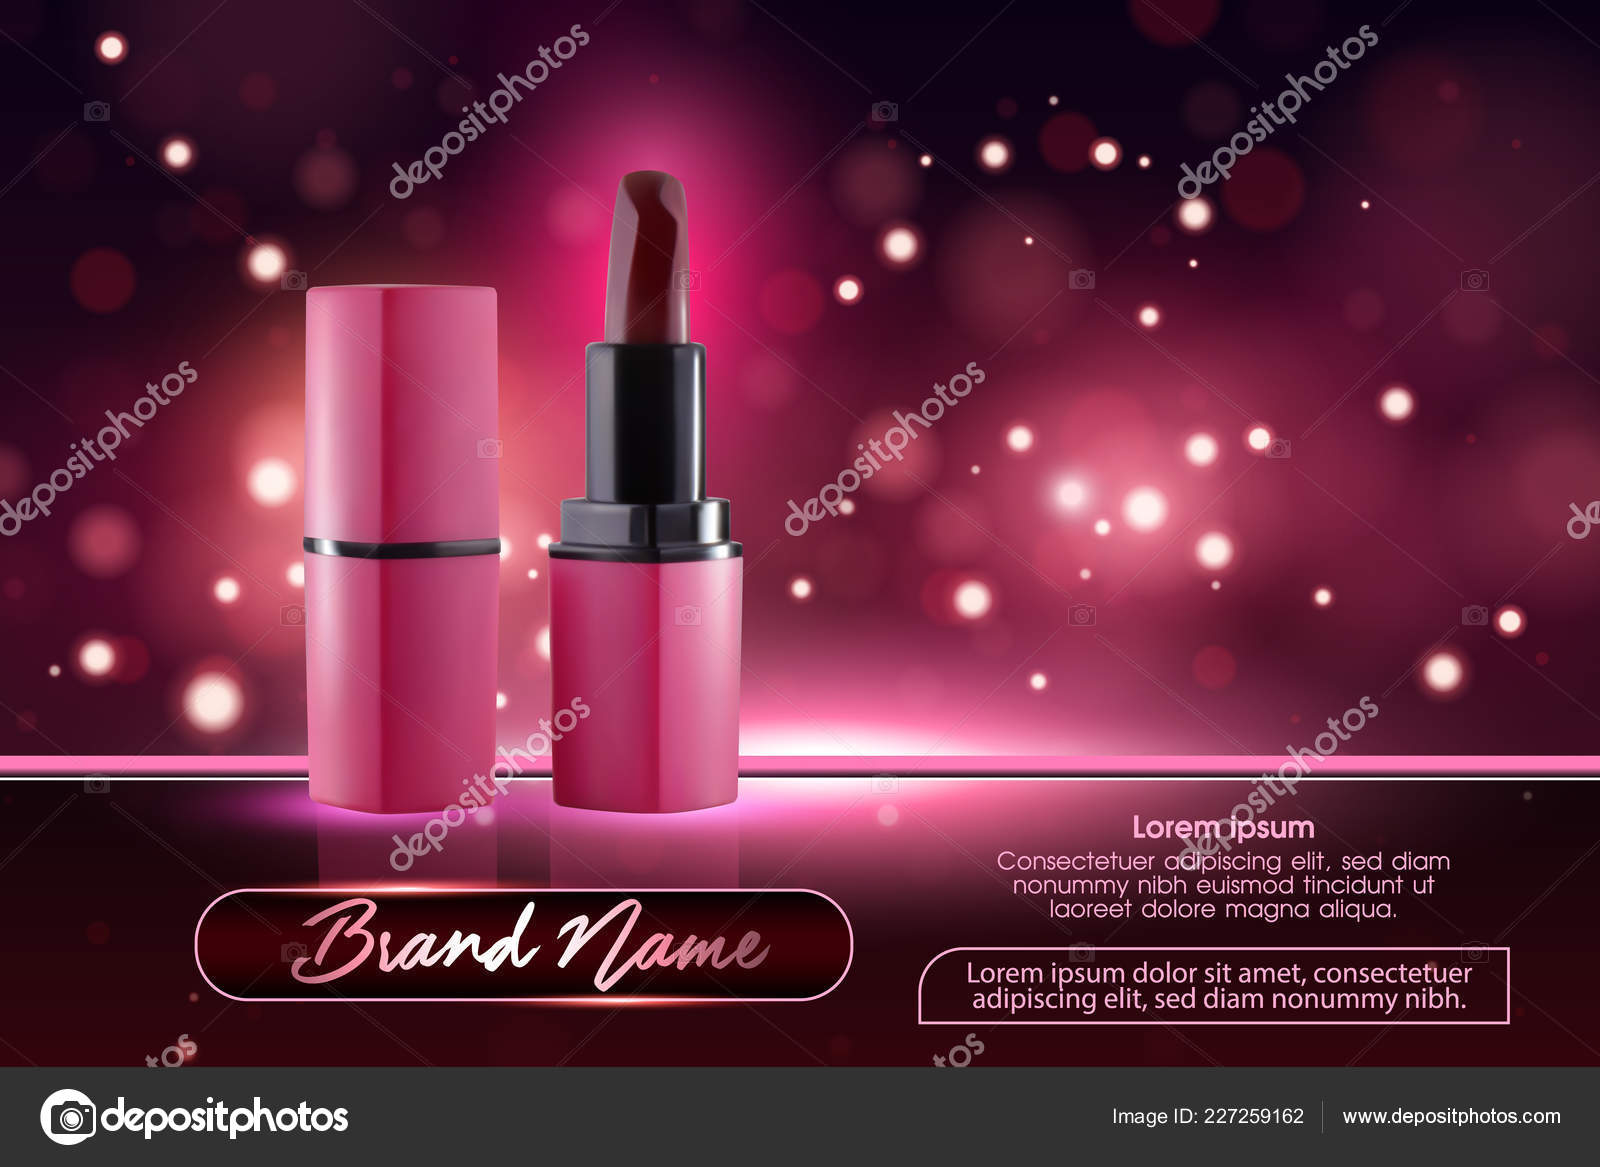 Makeup Ads Template Charming Red Lipstick Mockup With Sparkling Background Package Design Promotion Product Cosmetics Advertising Banner Flyer Billboard Poster Or Catalog 3d Vector Illustration Stock Vector C Volmon Tut By